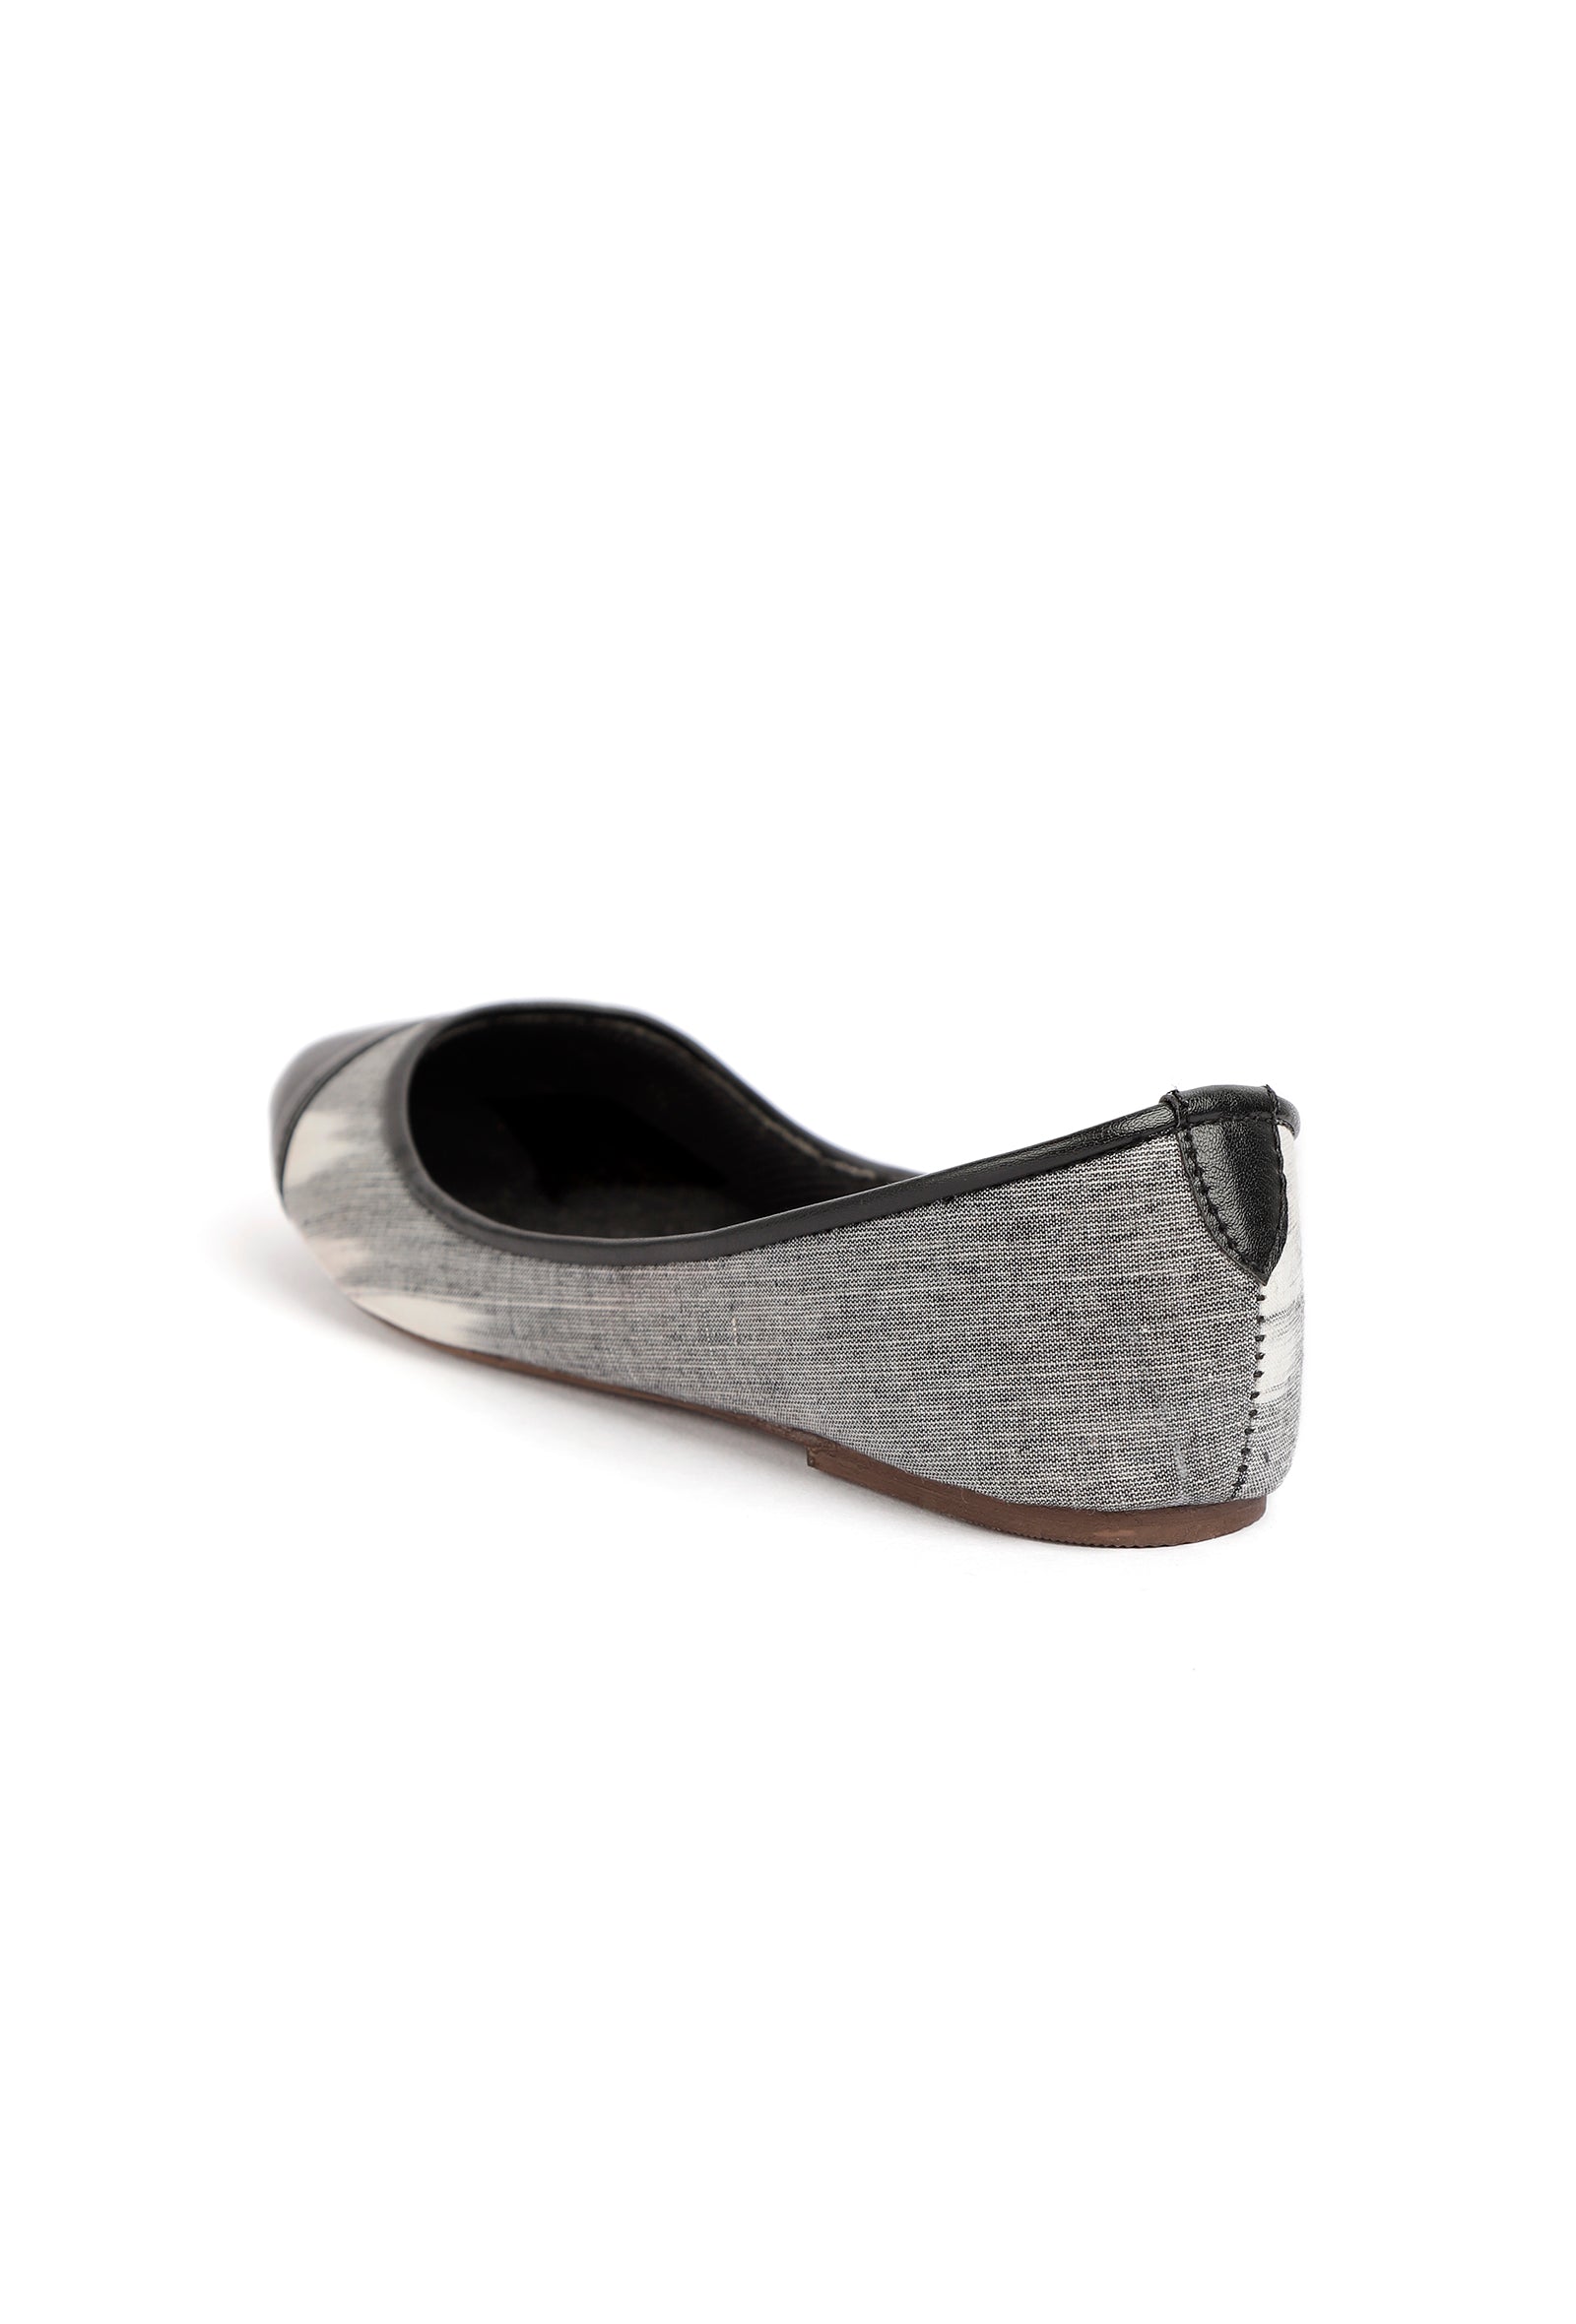 Black and White Ikat Cruelty Free Leather Flat Ballerinas